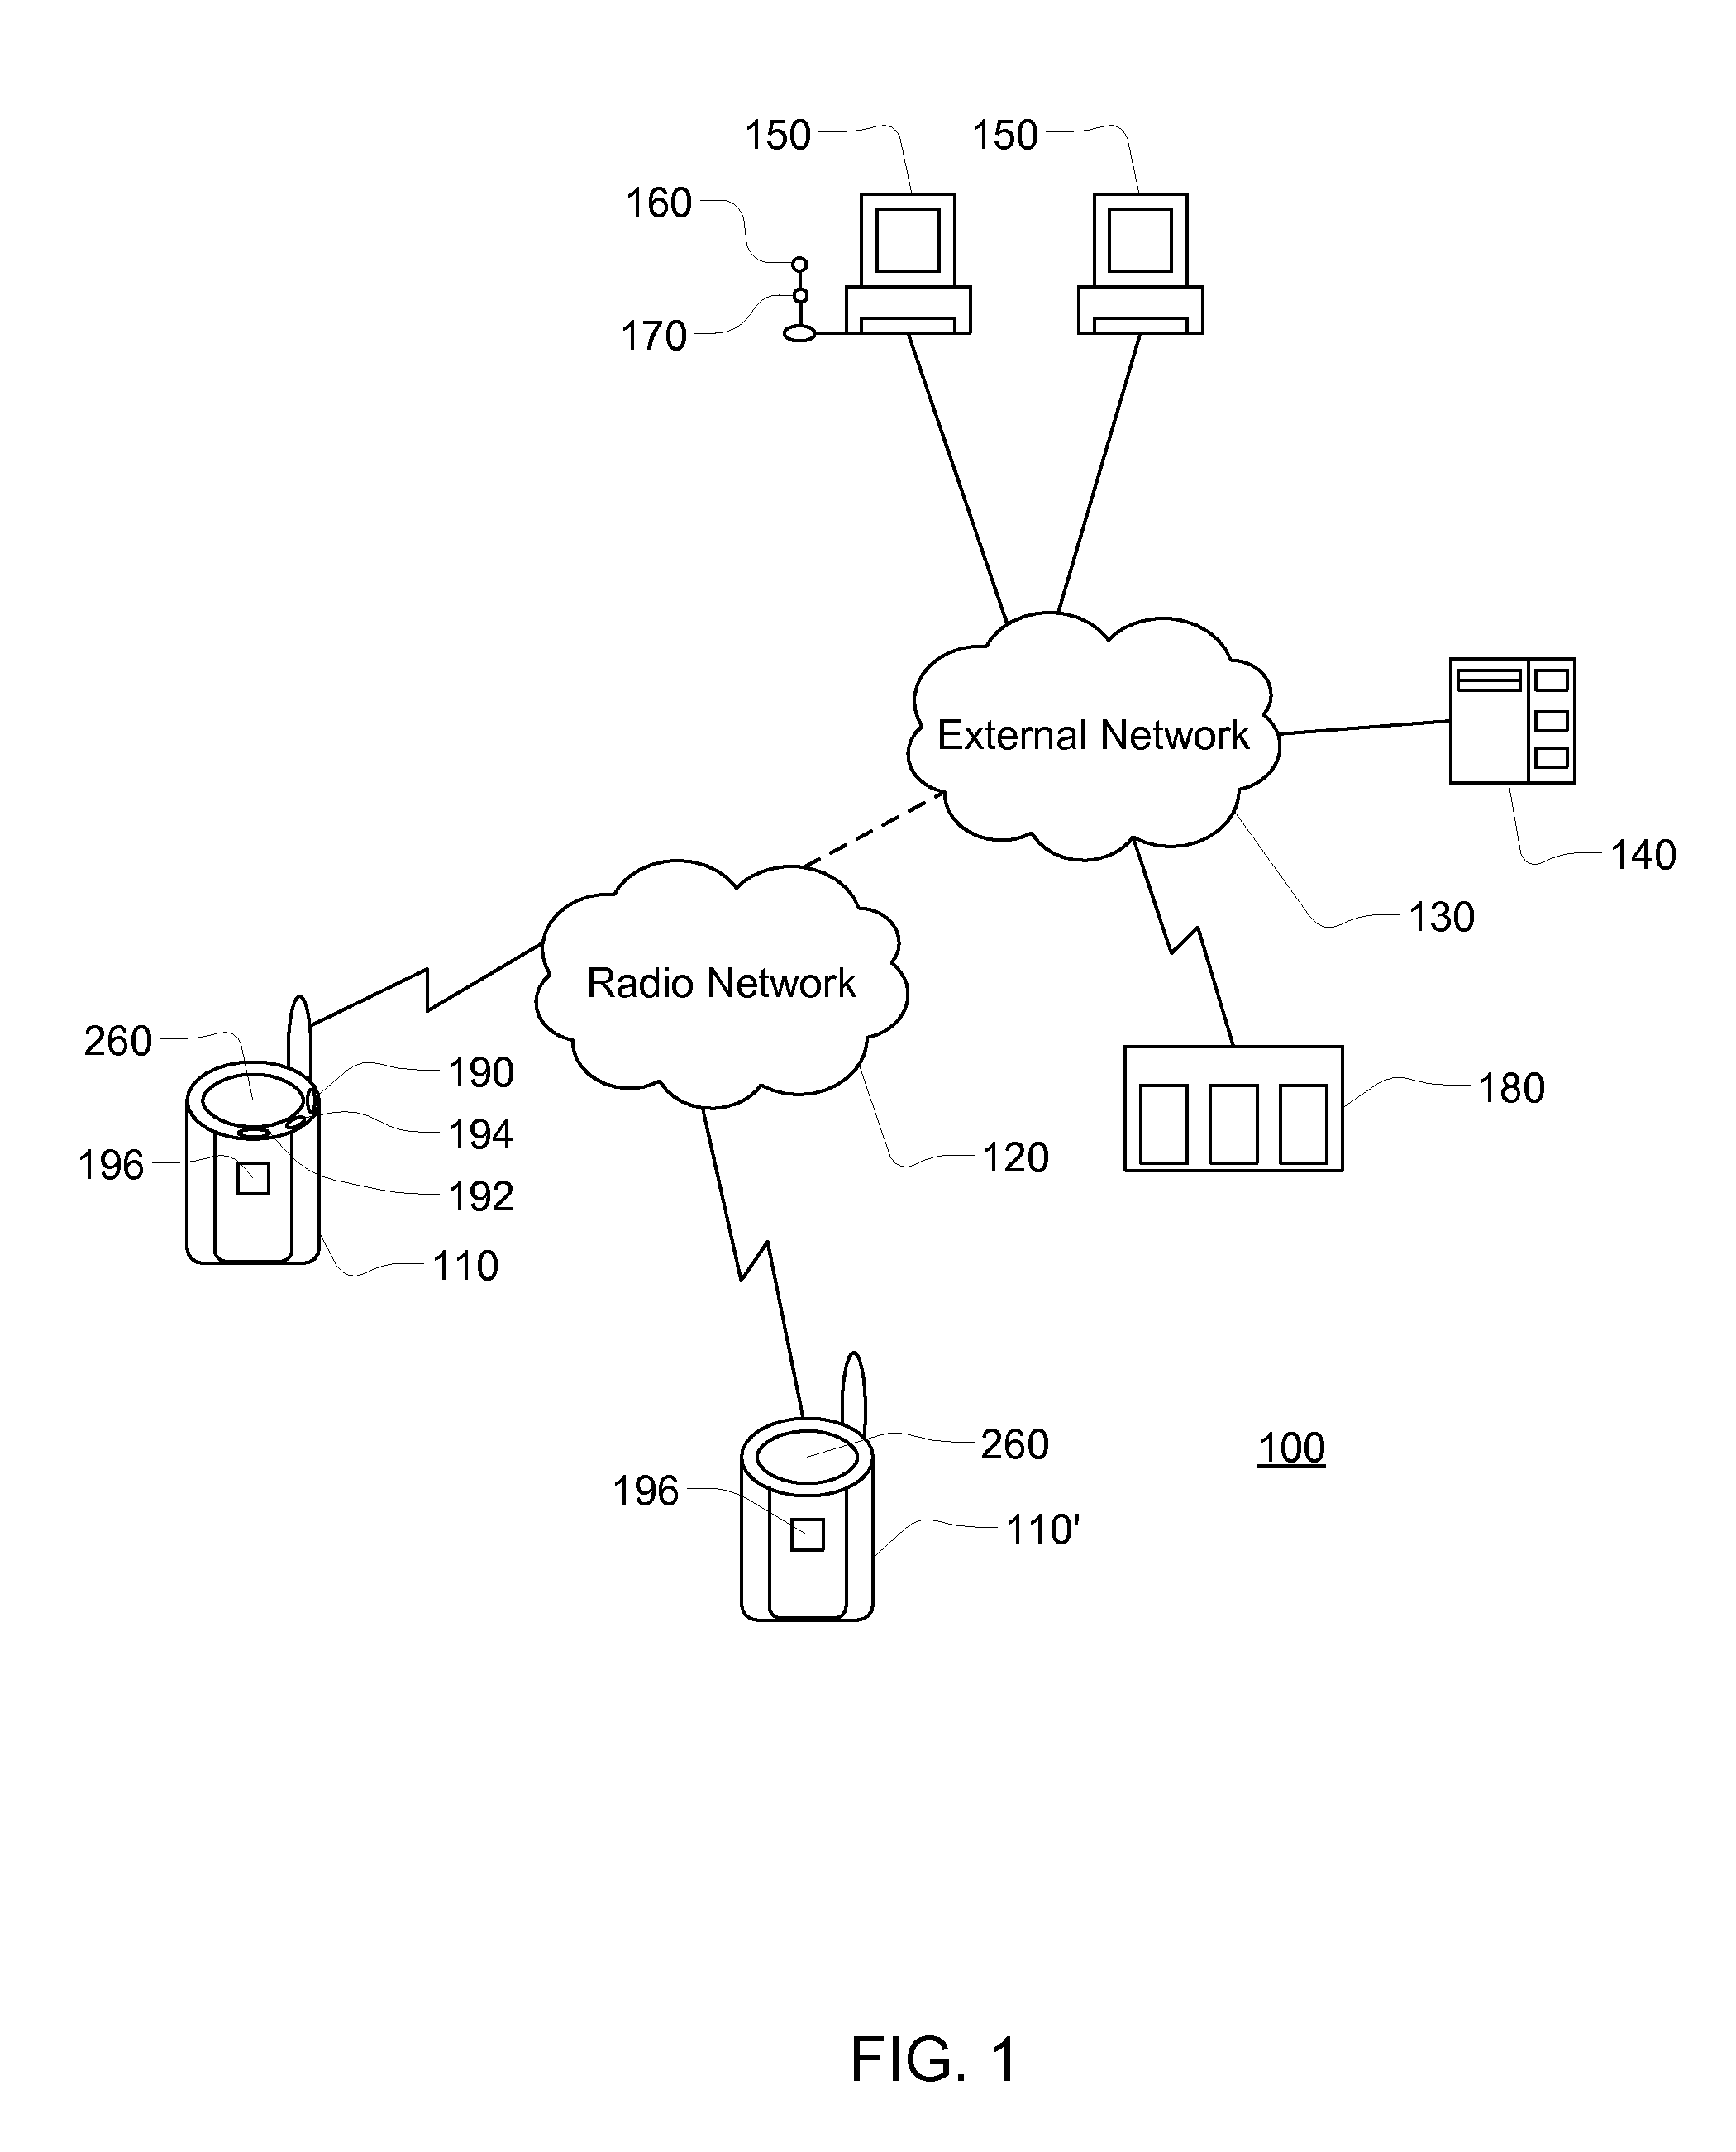 Apparatus and system for prompt digital photo delivery and archival